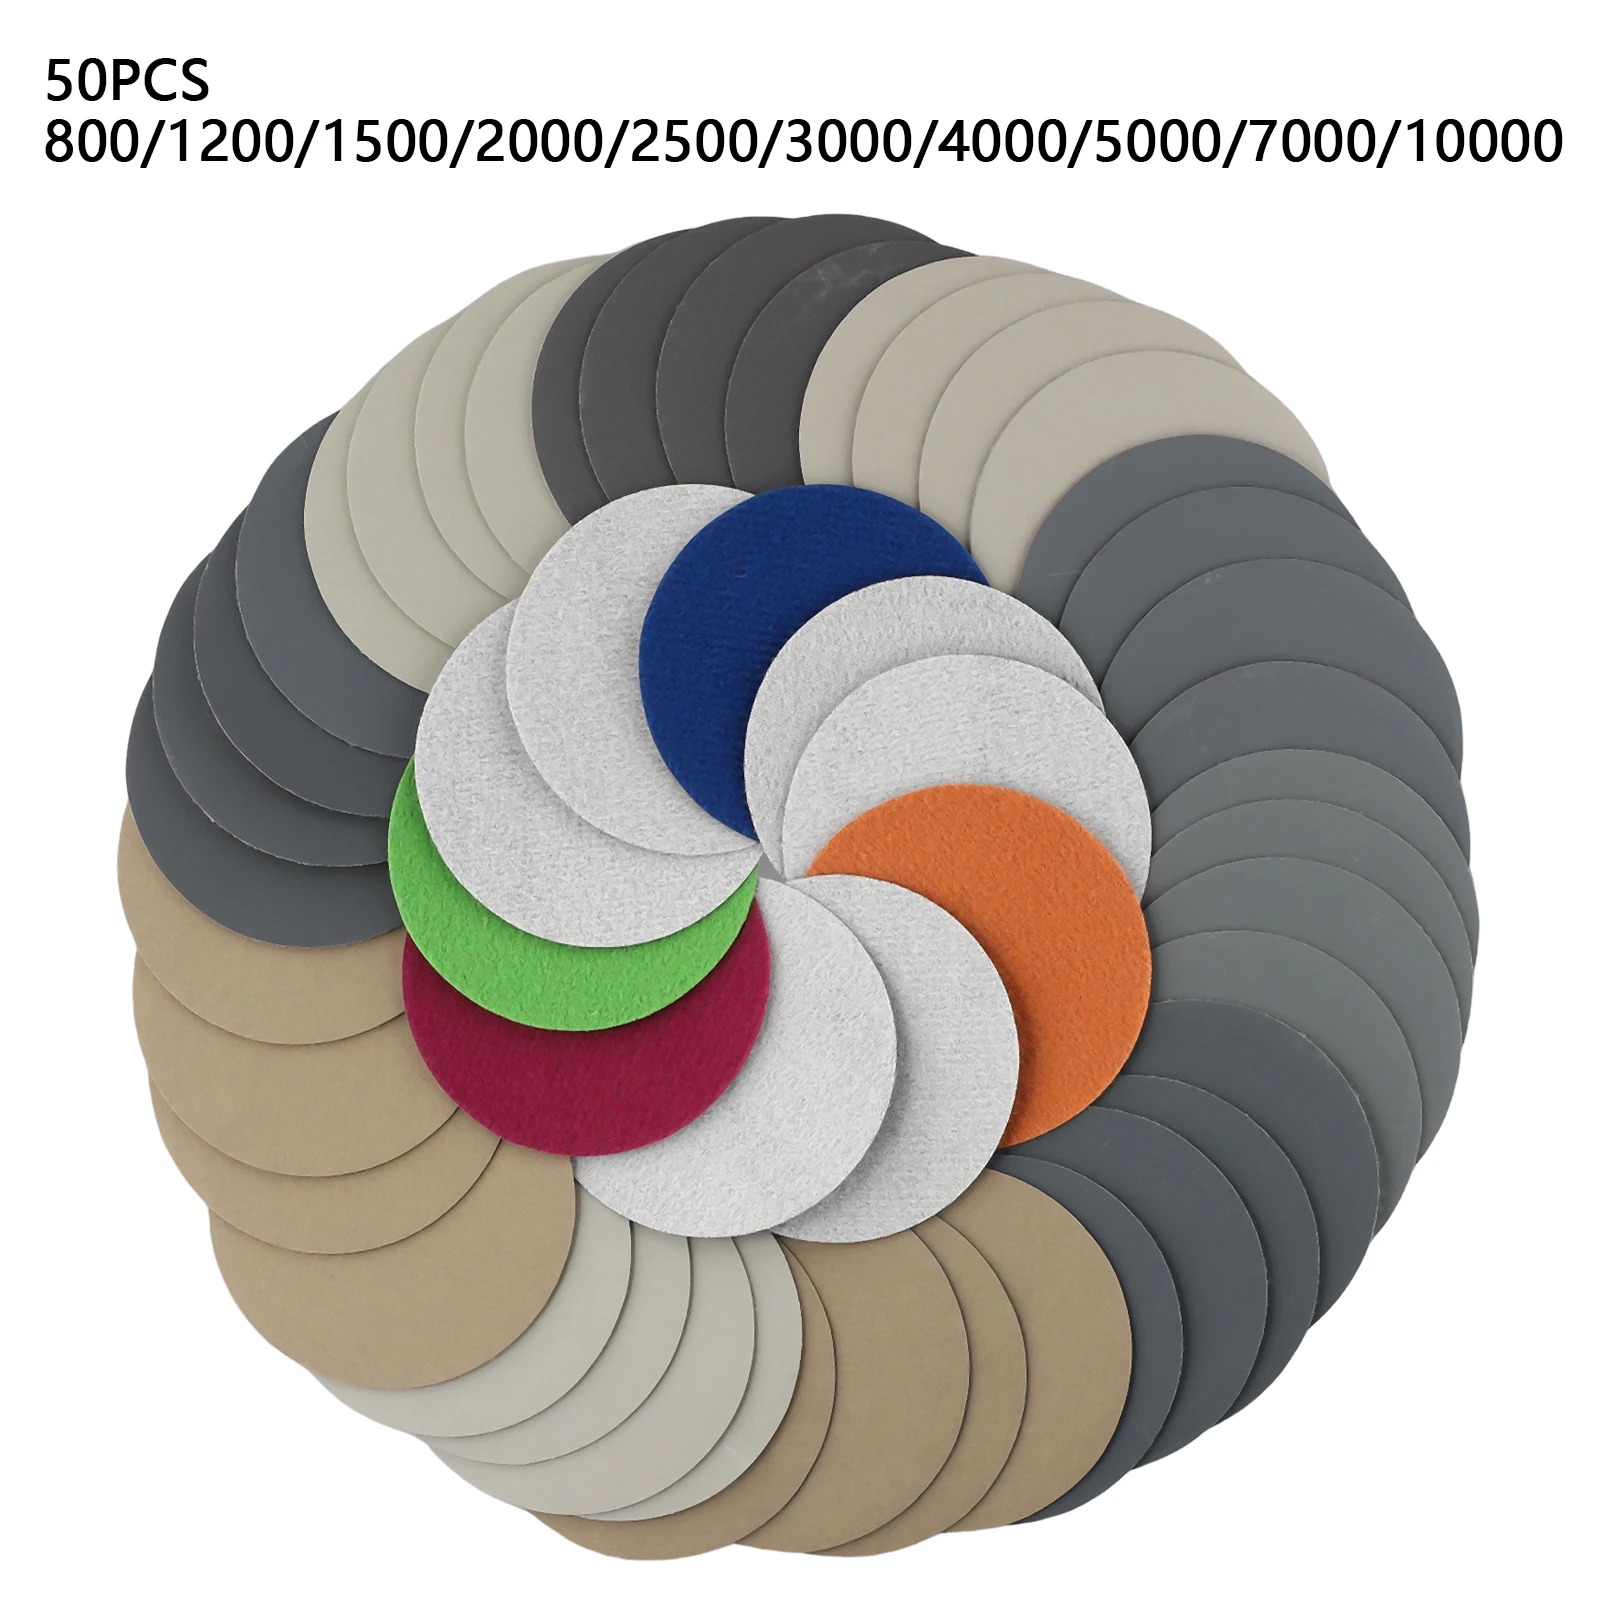 

50PCS 3inch Wet Or Dry Sandpaper Hook And Loop Silicon Carbide Sanding Discs Latex Flocking, High Flexibility